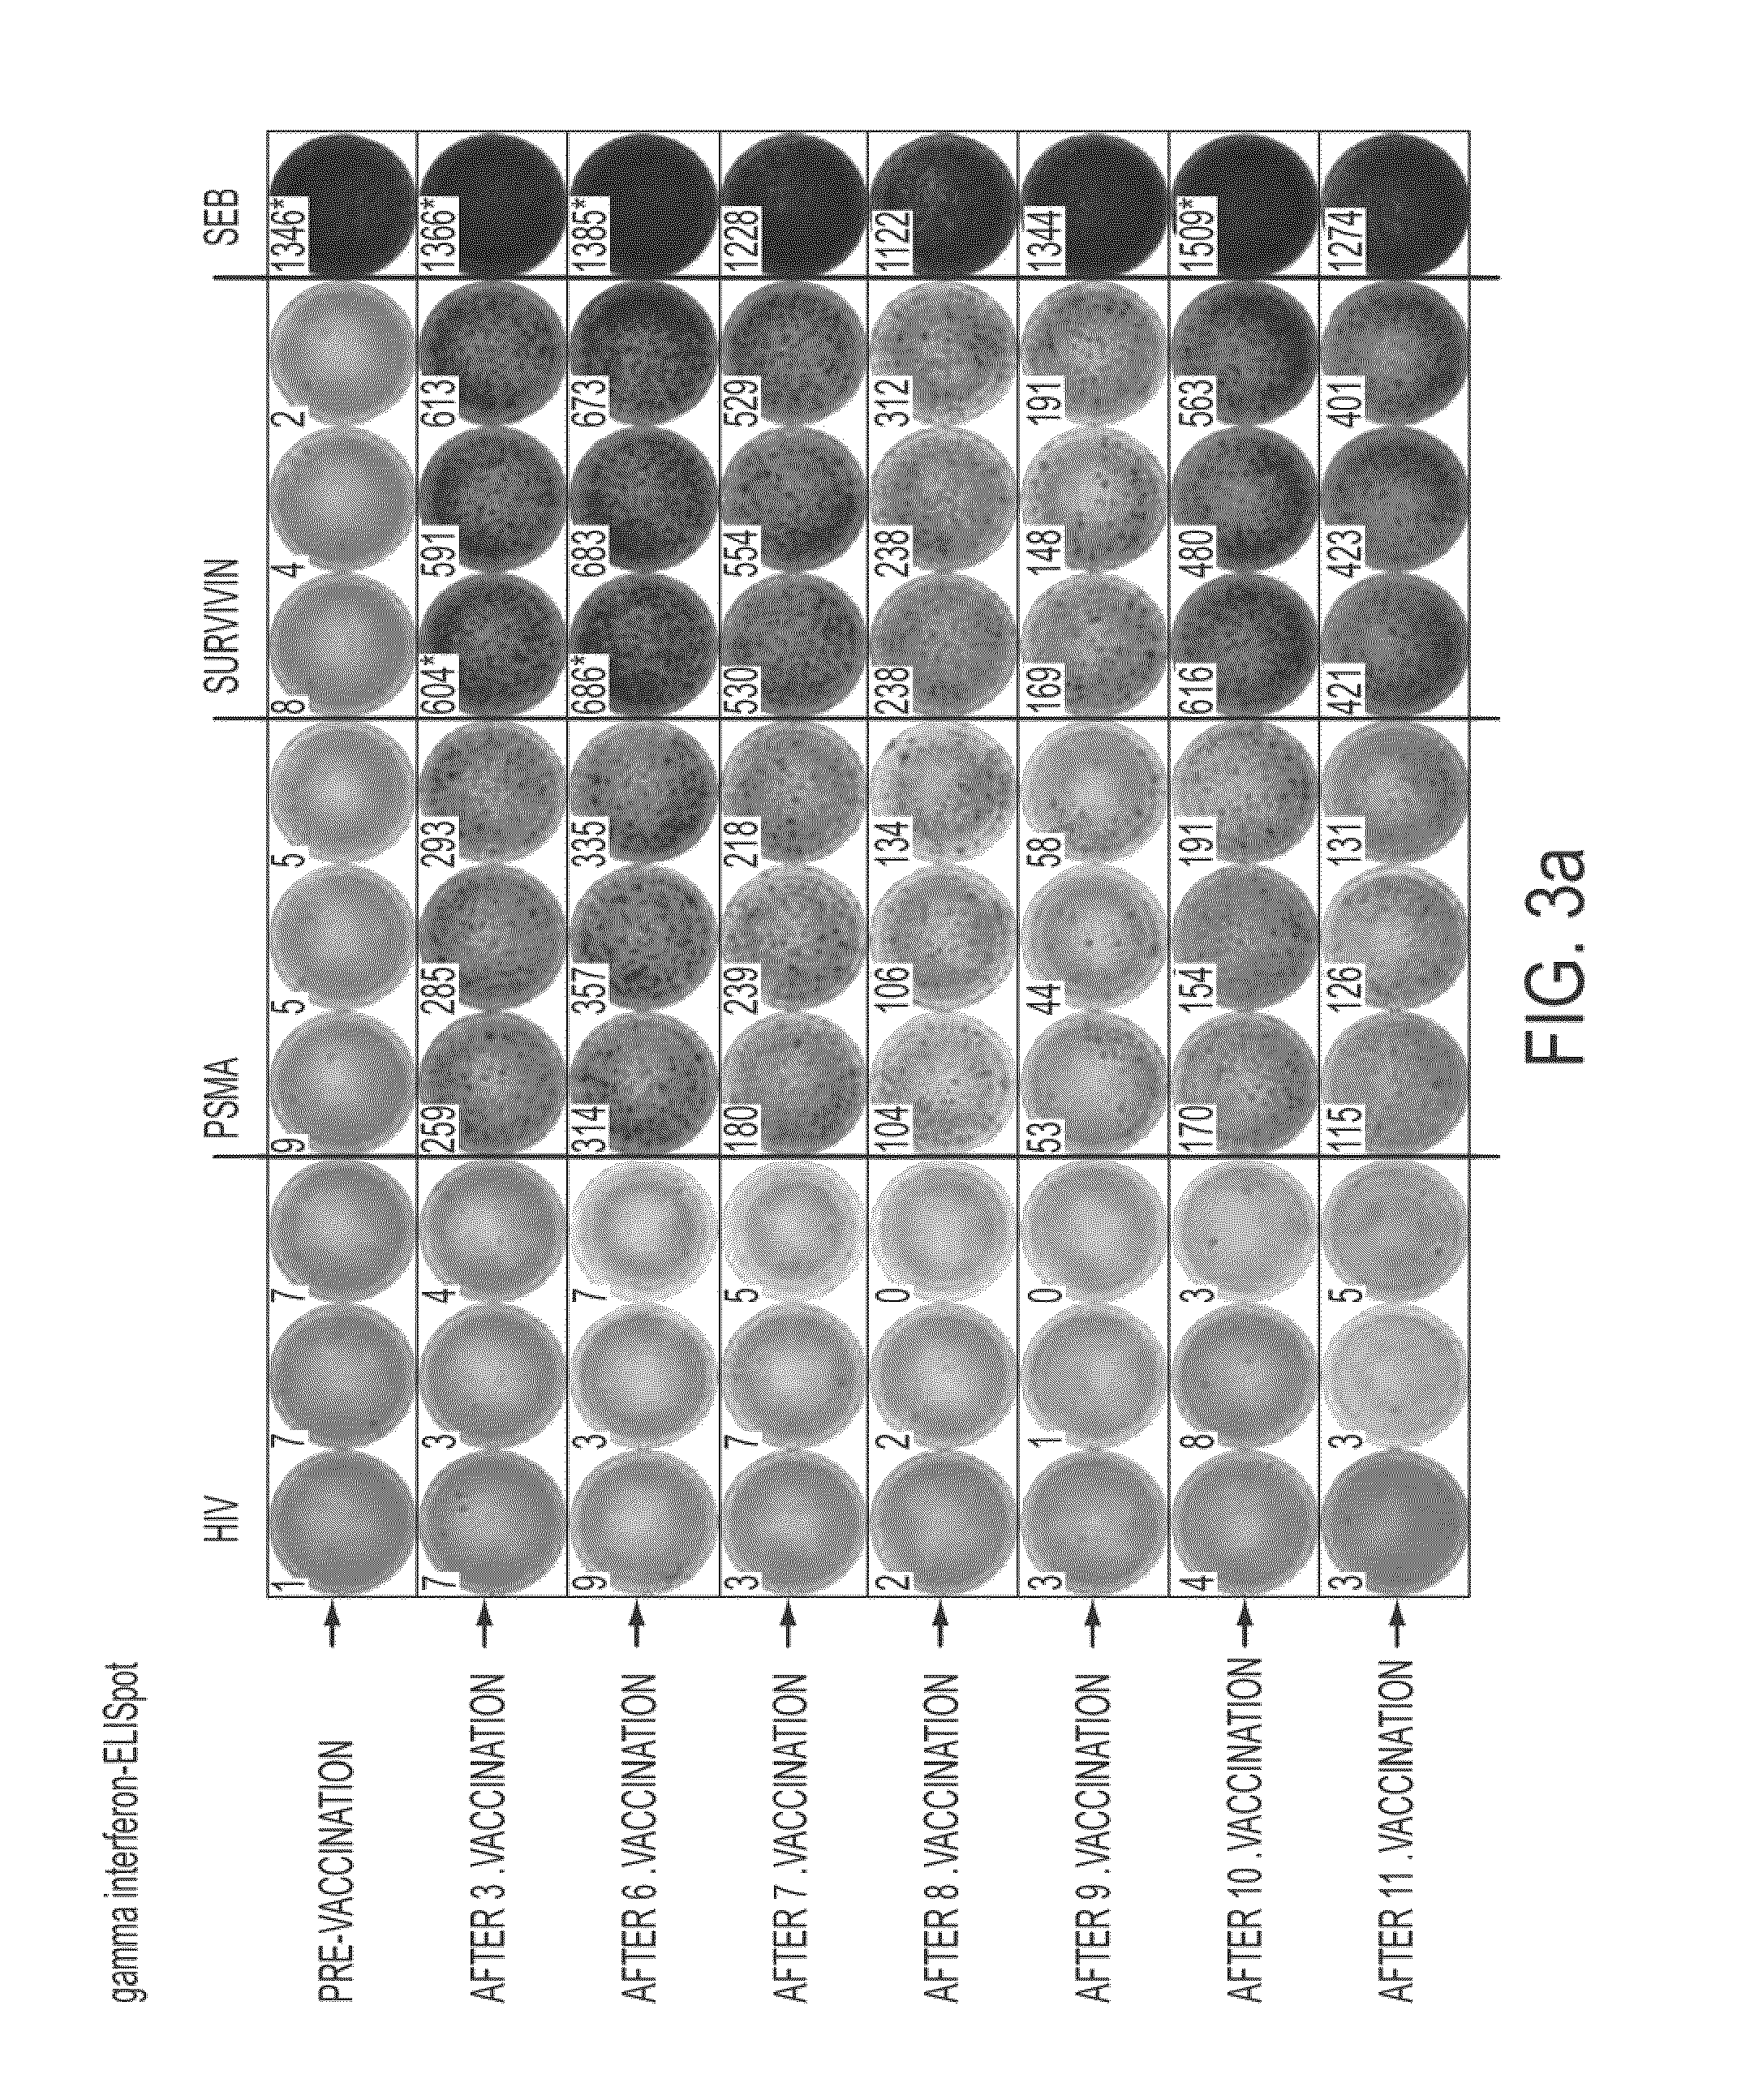 Composition of tumor-associated peptides and related anti-cancer vaccine for the treatment of gastric cancer and other cancers